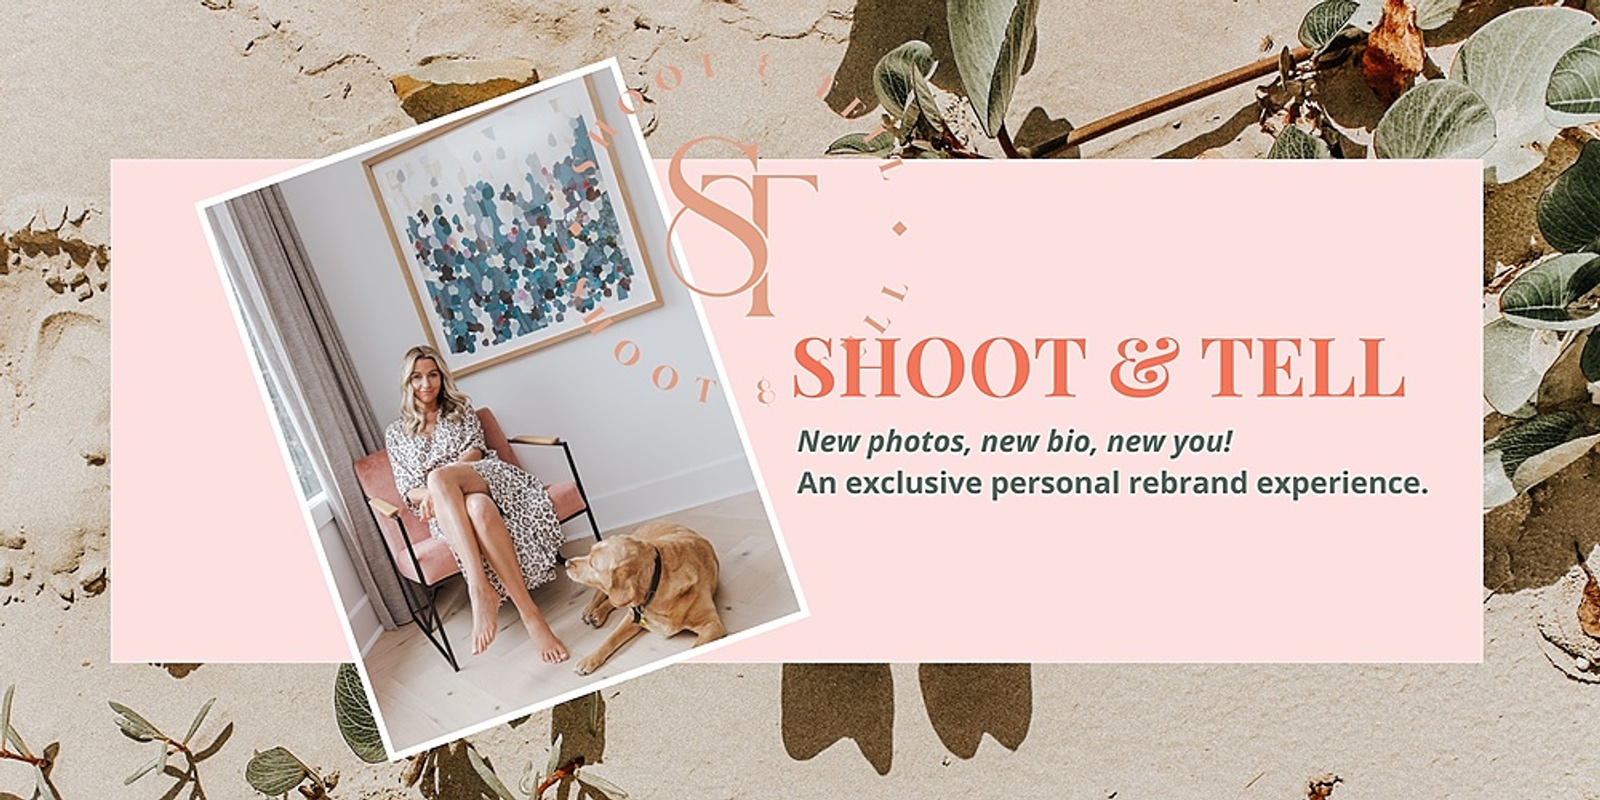 Shoot & Tell - Personal Rebrand Experience